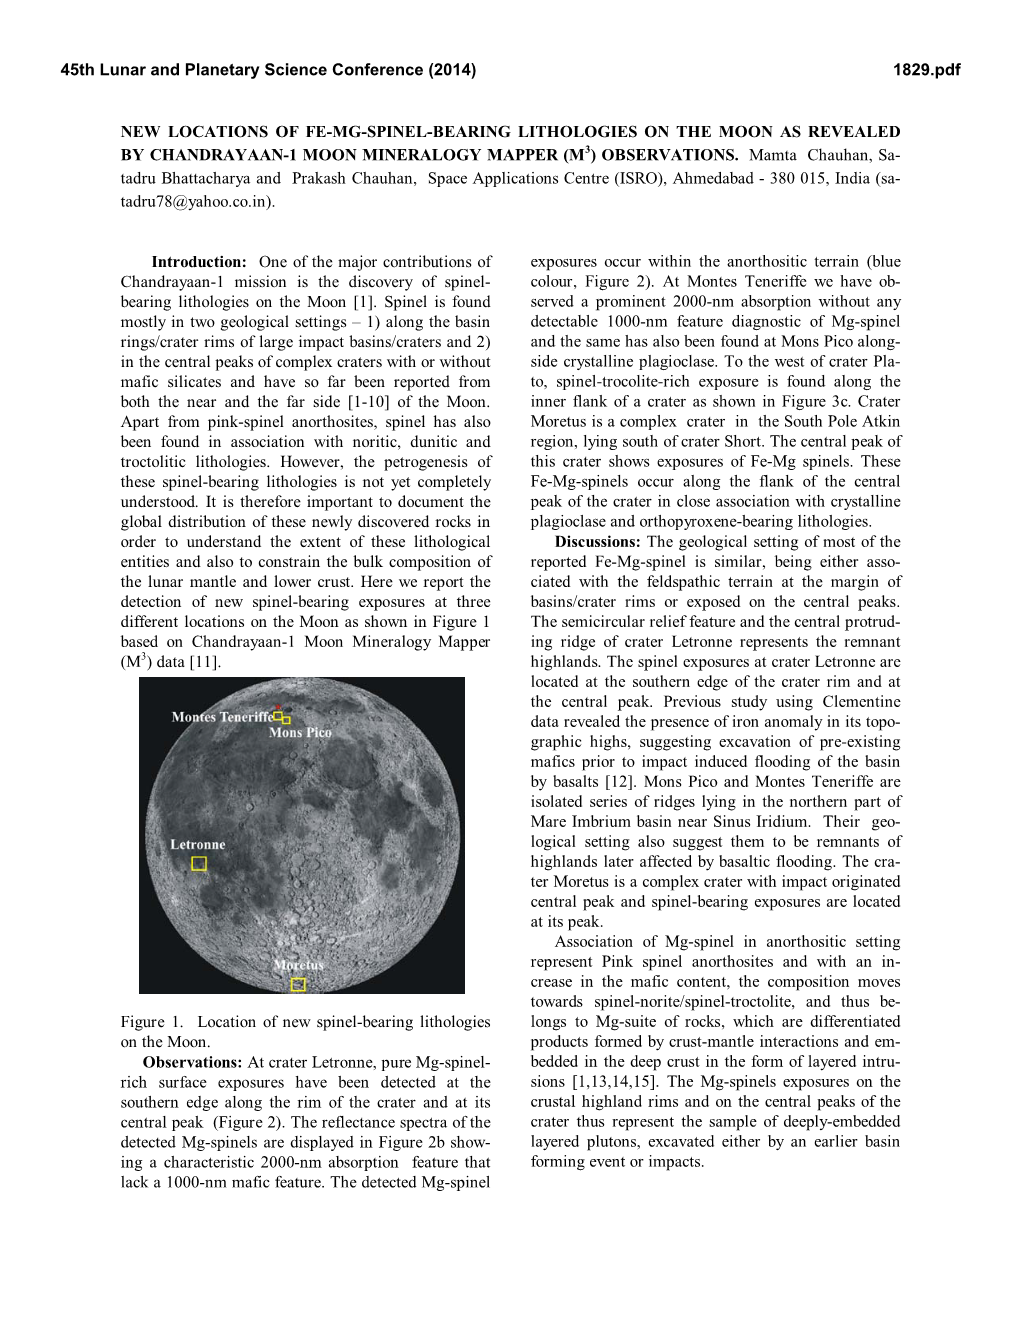 New Locations of Fe-Mg-Spinel-Bearing Lithologies on the Moon As Revealed by Chandrayaan-1 Moon Mineralogy Mapper (M3) Observations